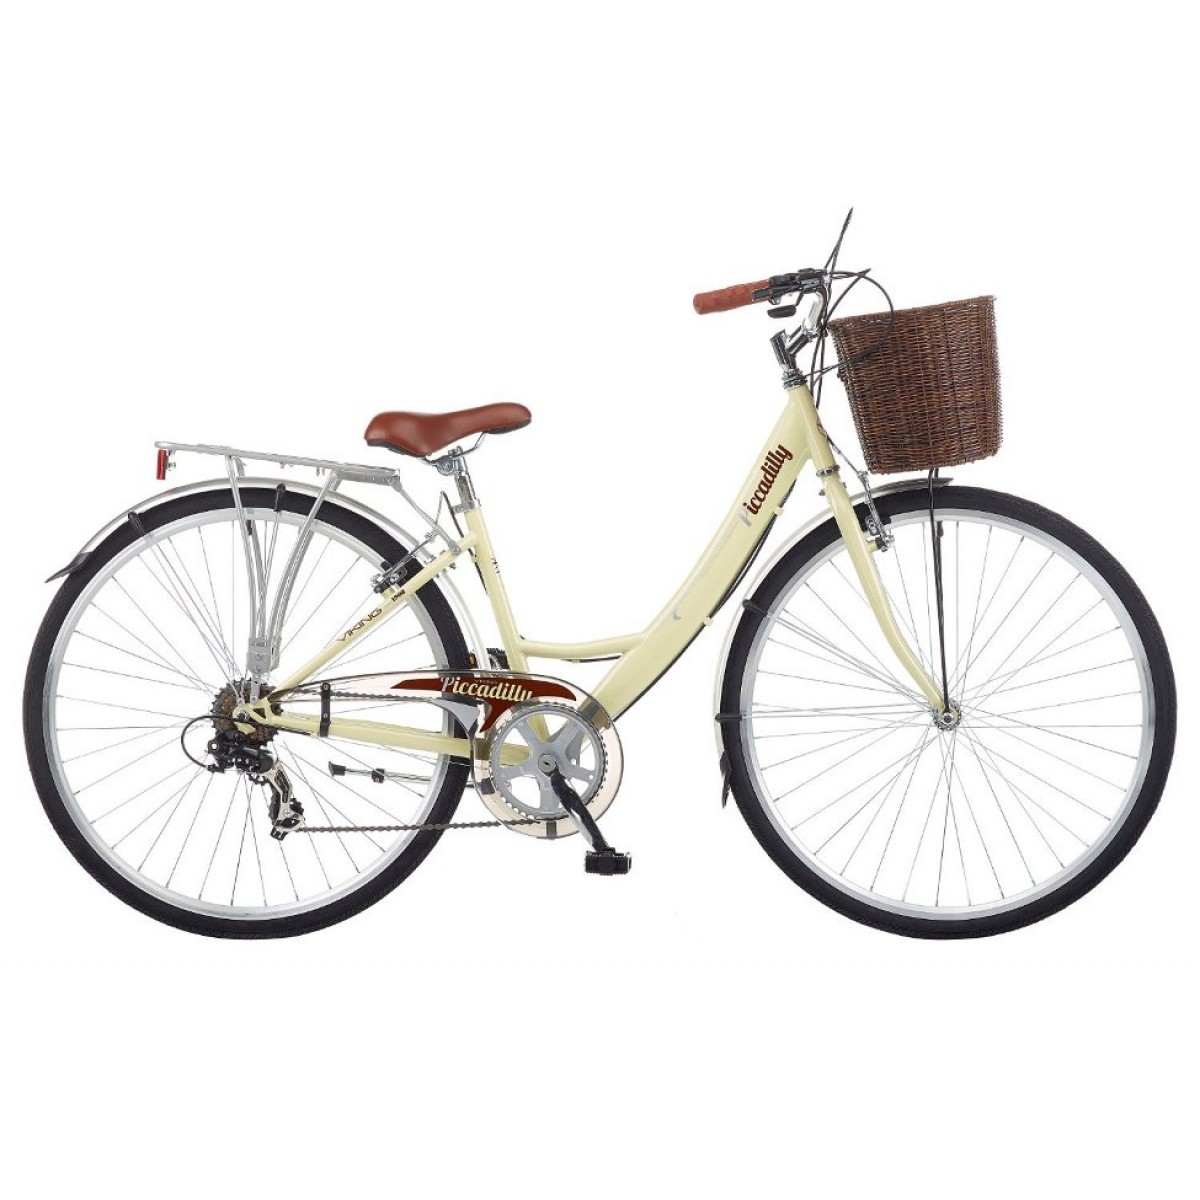 LIFESTYLE HERITAGE BICYCLES 12" Details about   LADIES TRADITIONAL WICKER BASKET VINTAGE STYLE 